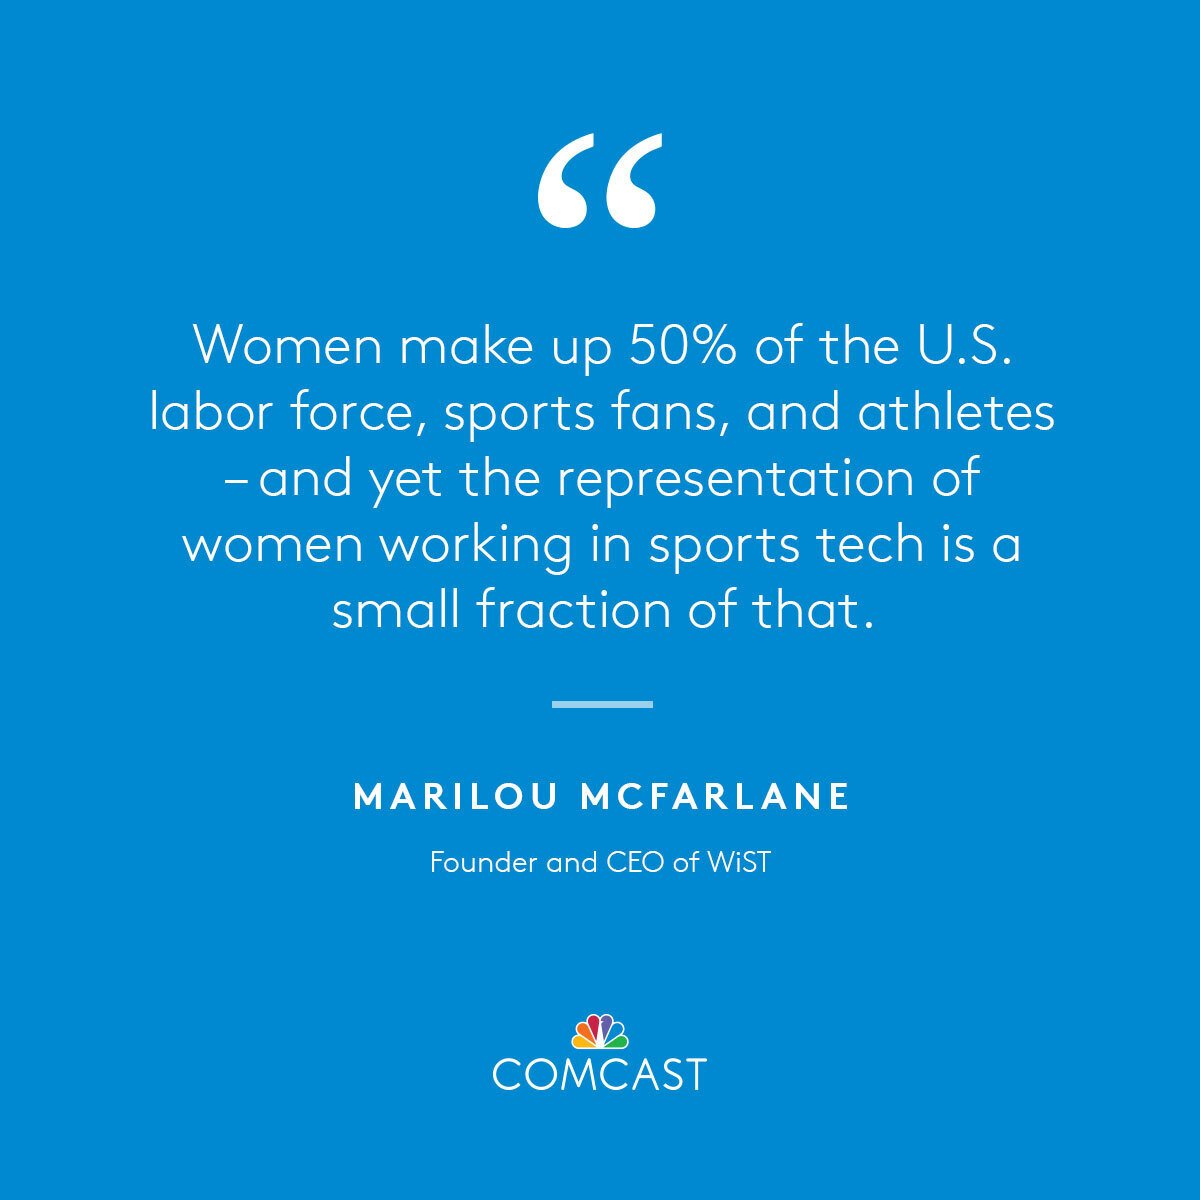 Comcast Quote from Marilou.JPG